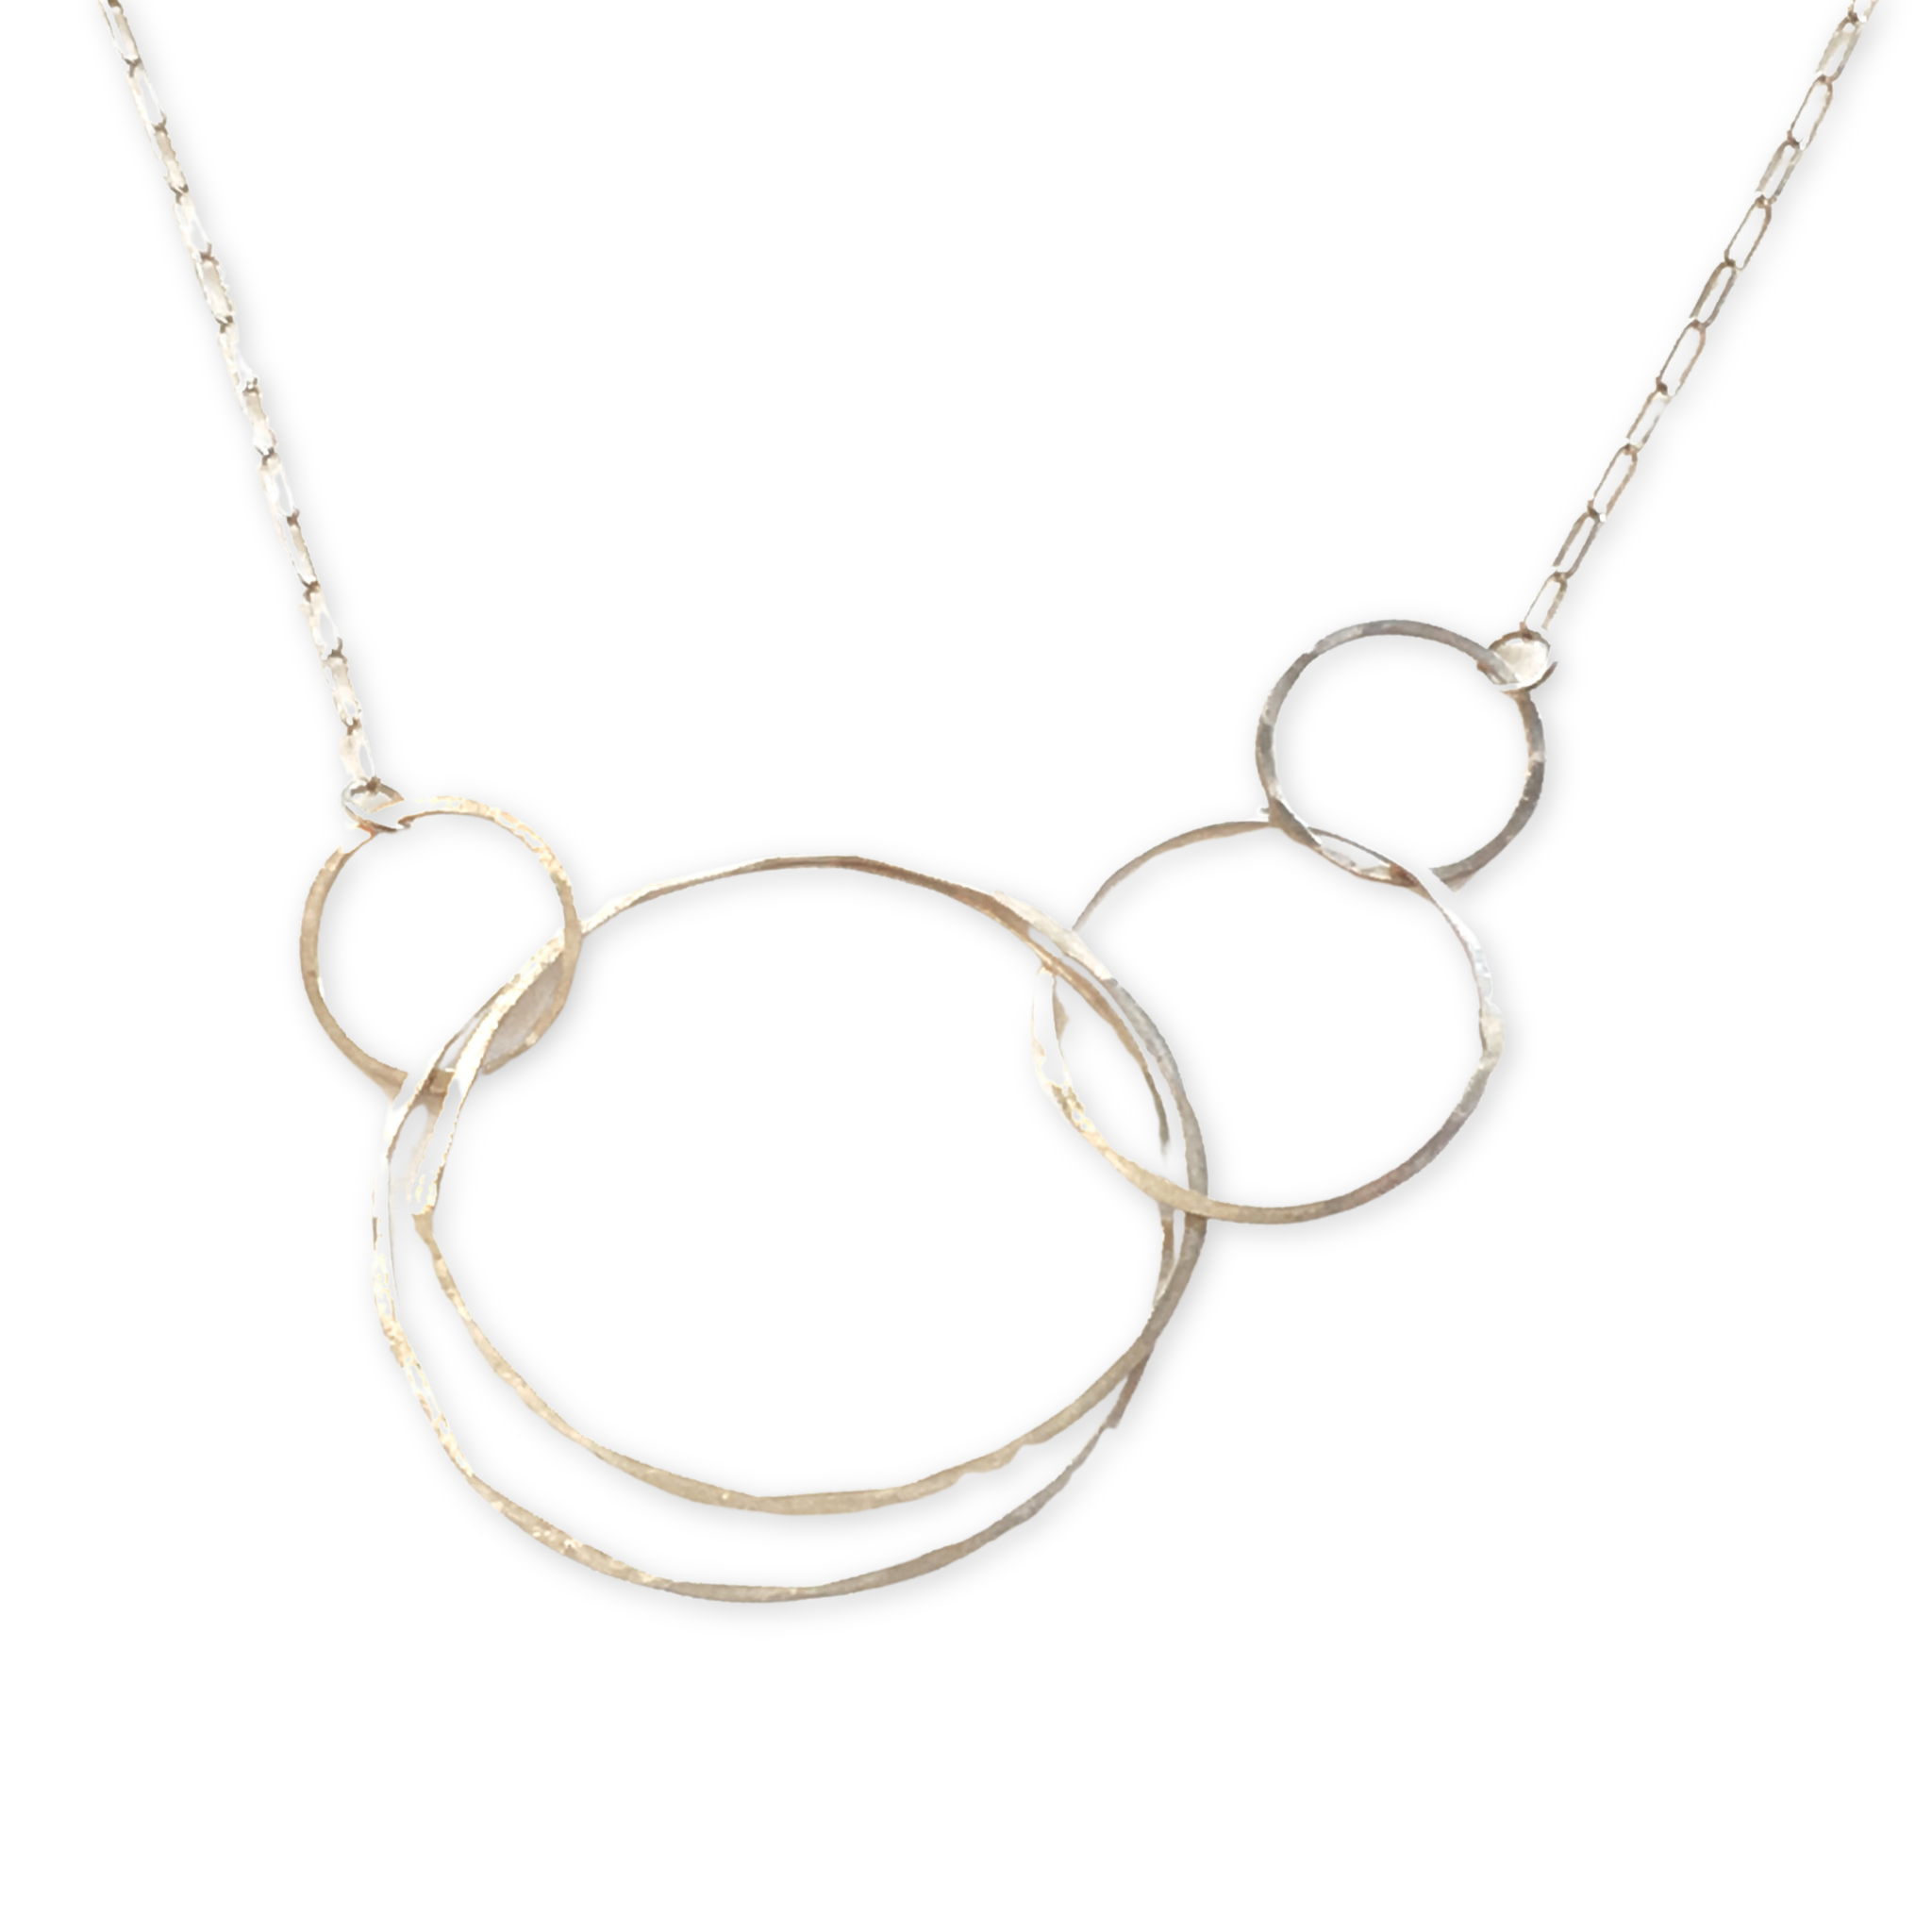 necklace with five different sized circles